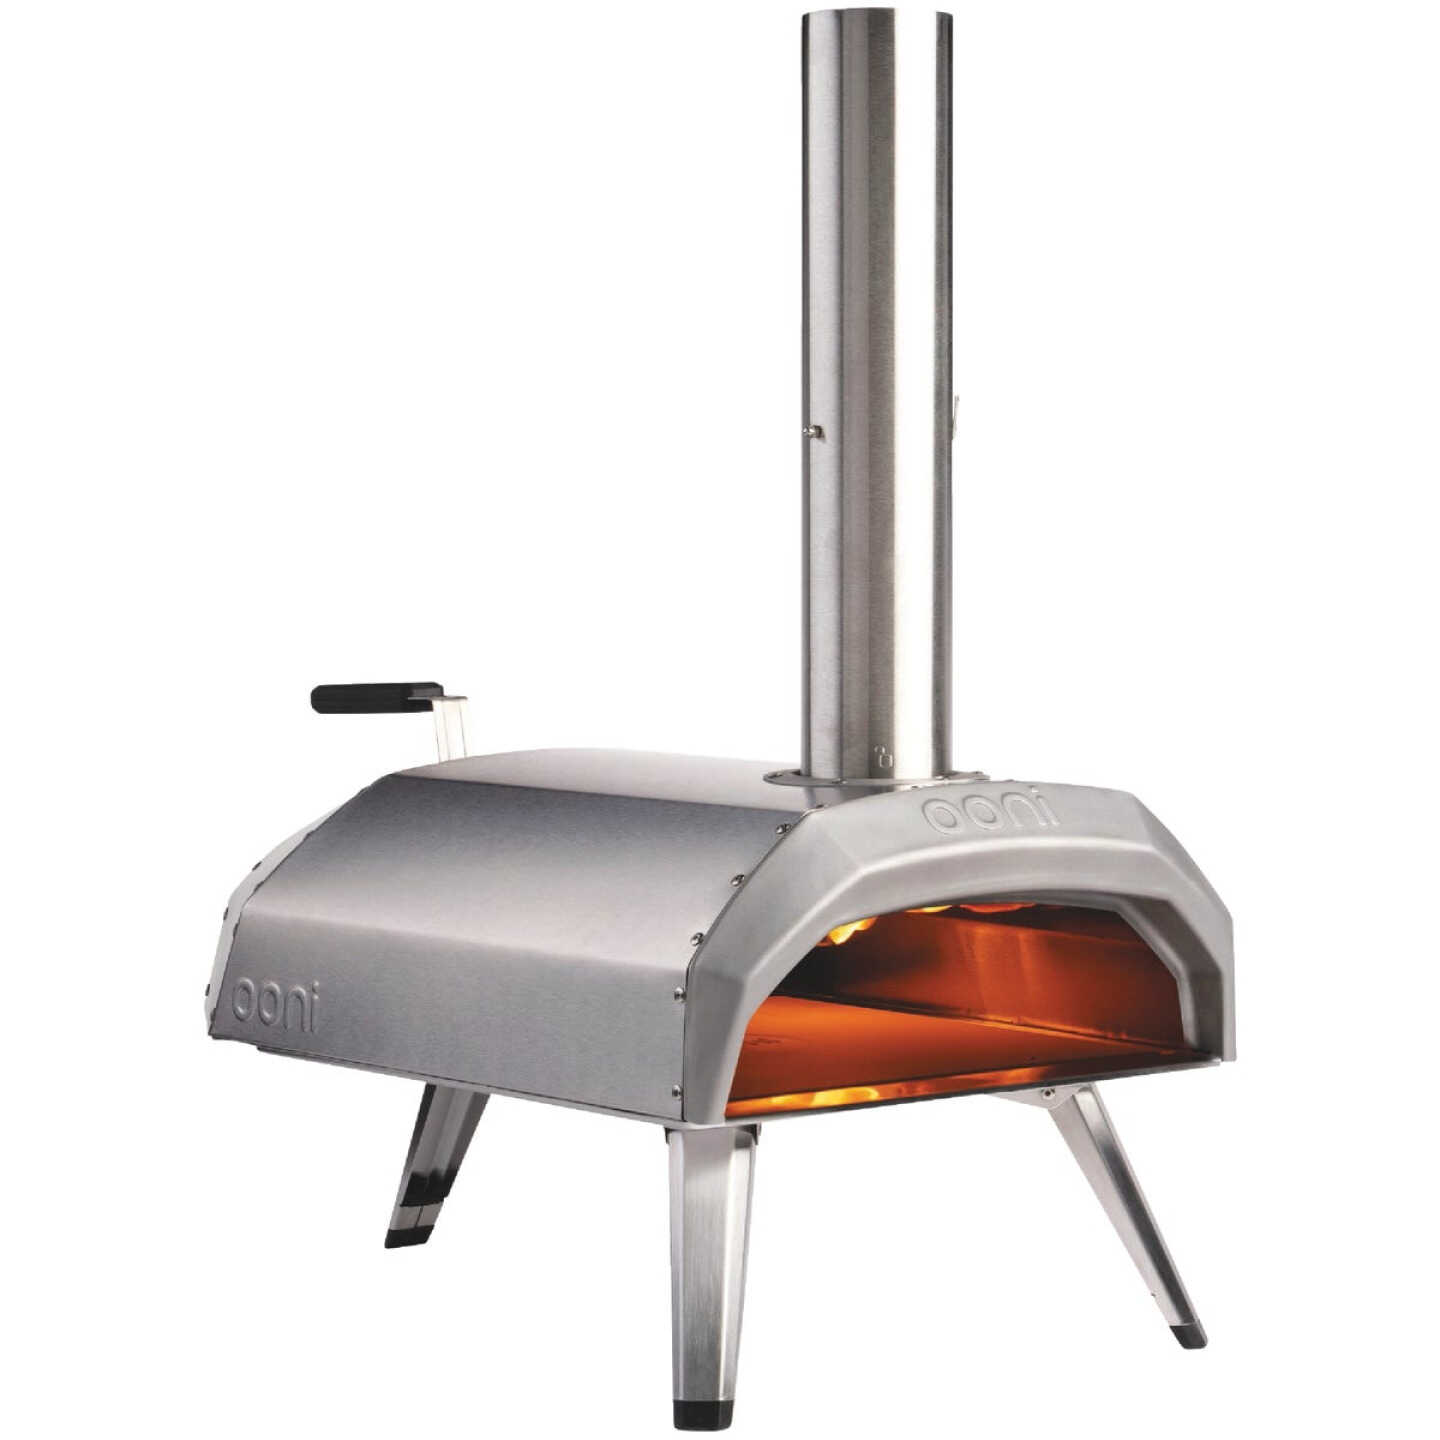 Wood Fired Pizza Ovens Accessories - Fire Guard, Brush Scrapper  Wood  fired pizza oven, Pizza oven accessories, Wood fired pizza